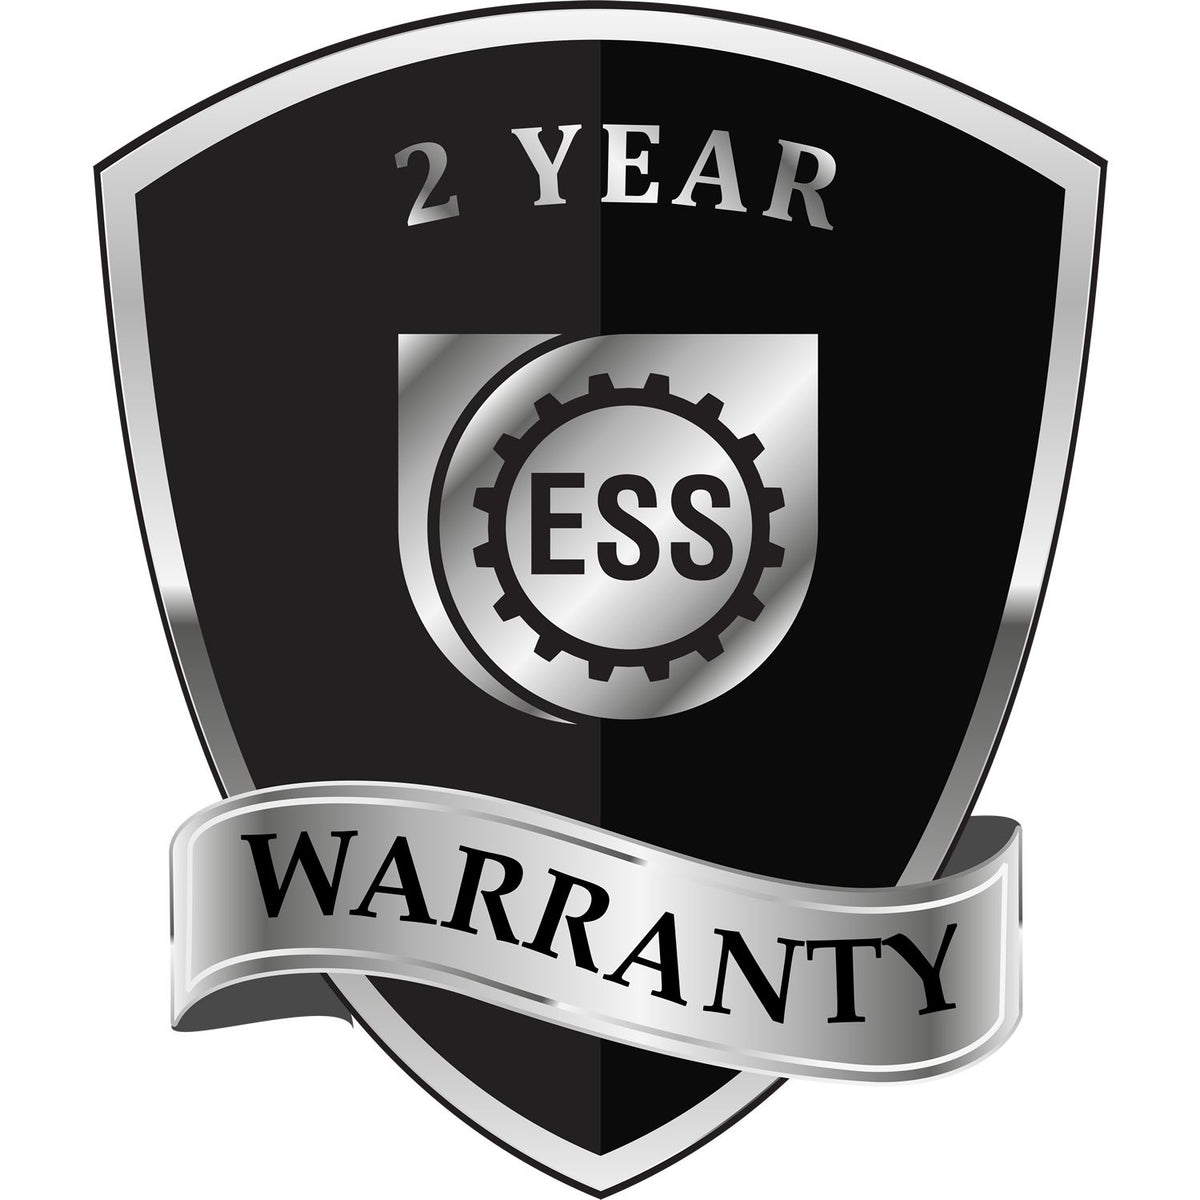 A black and silver badge or emblem showing warranty information for the Hybrid Georgia Architect Seal